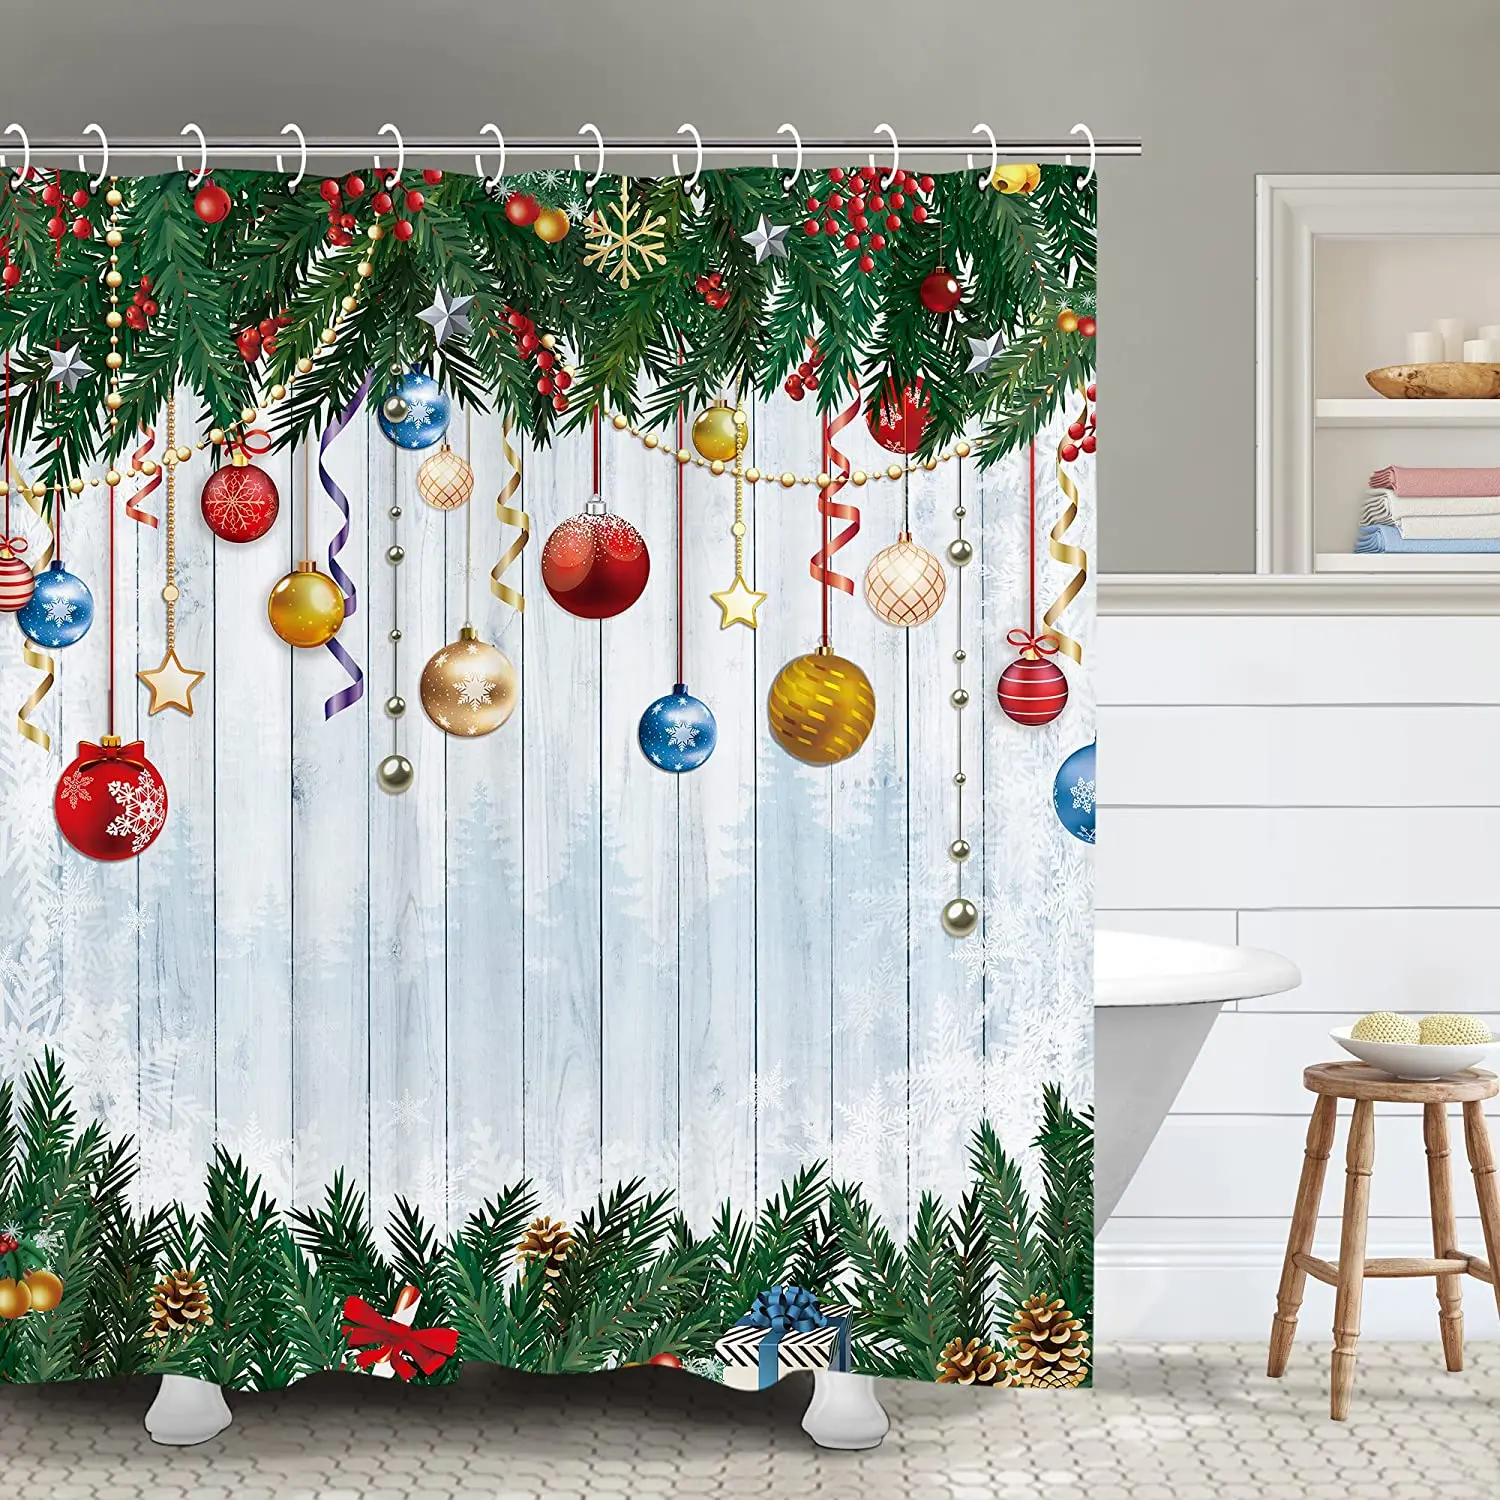 

Christmas Shower Curtain Winter Snow Xmas Bathroom Merry with Hooks Rustic Colorful Baubles Ball Farm Pine Tree Holiday Curtains